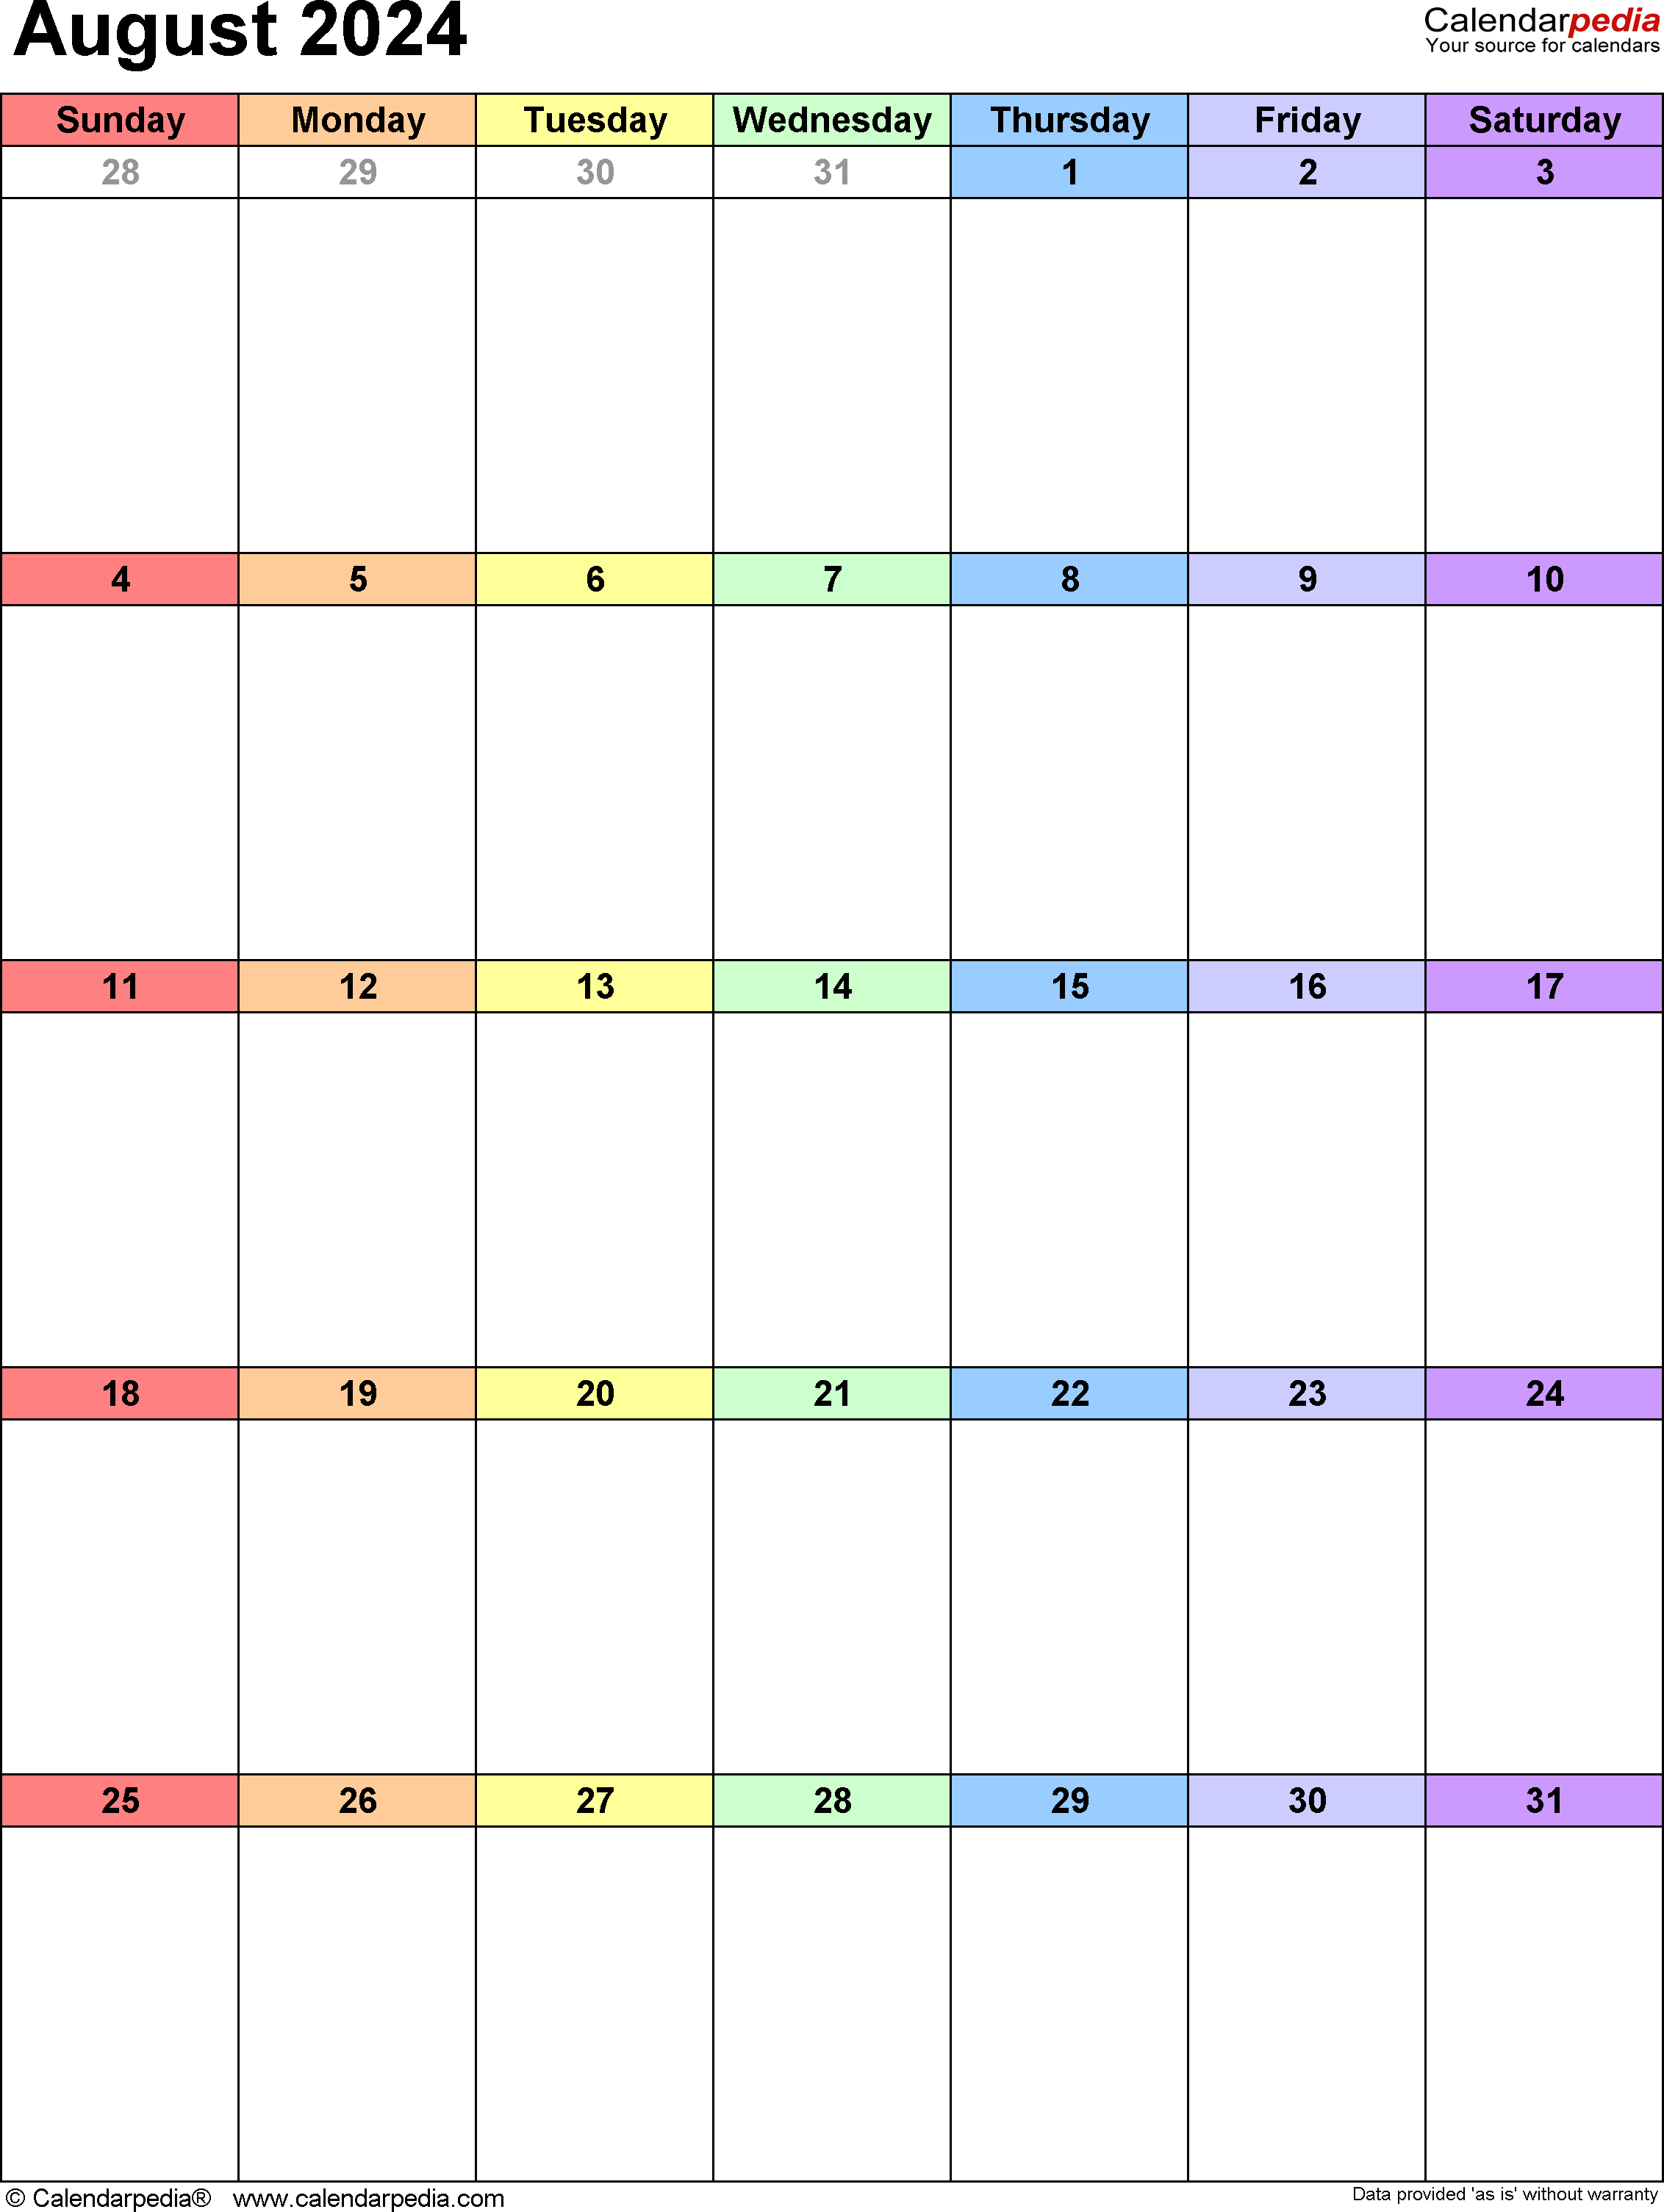 August 2024 Calendar | Templates For Word, Excel And Pdf intended for Free Printable August 2024 Calendar Portrait